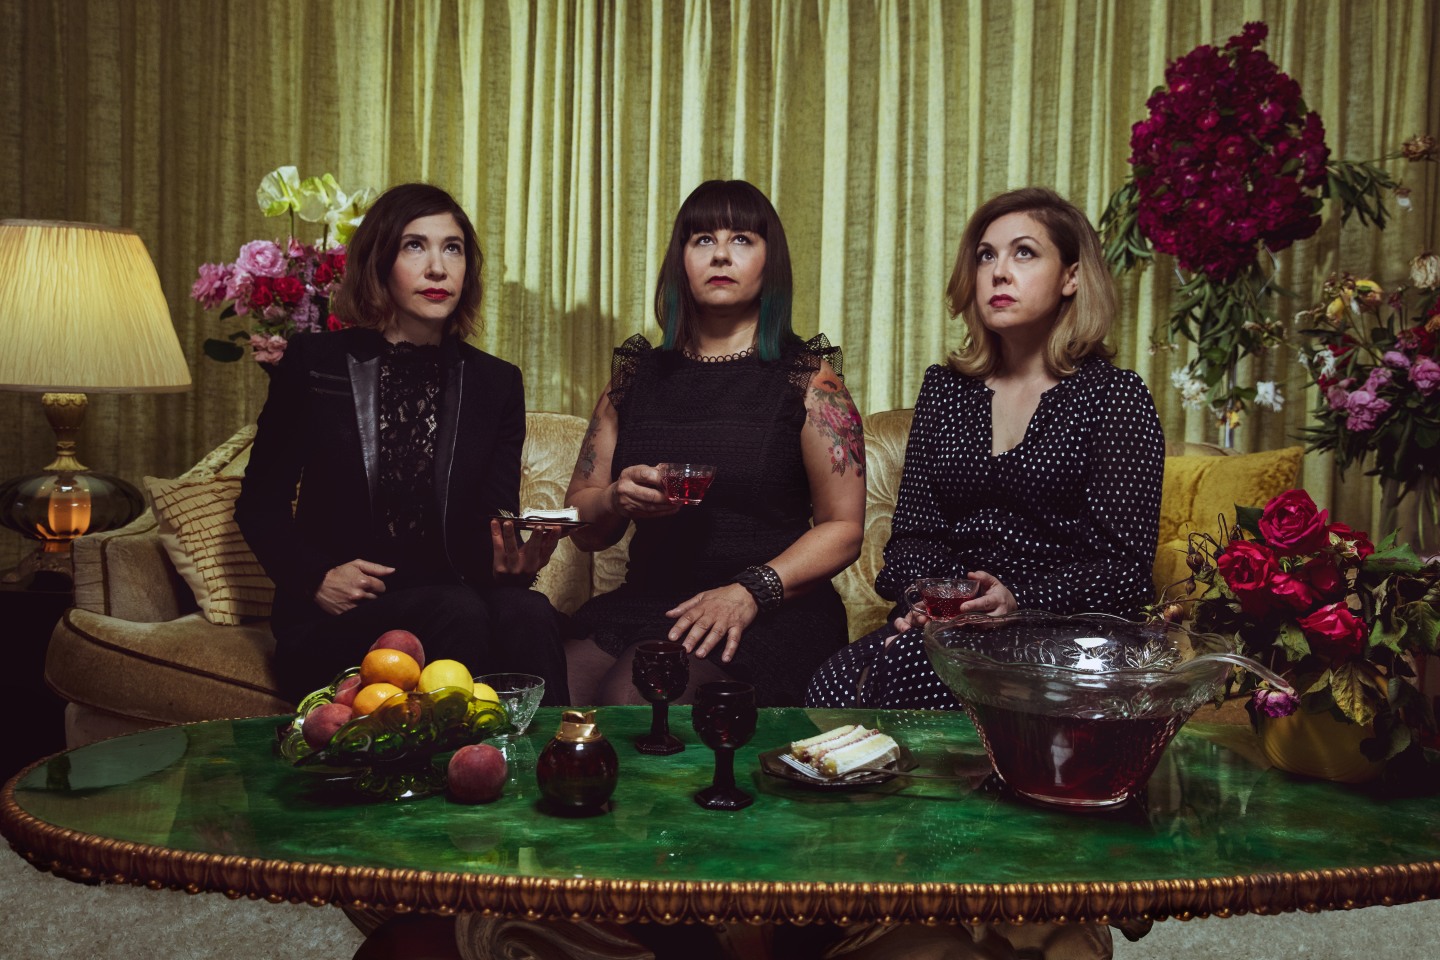 The death and rebirth of Sleater-Kinney